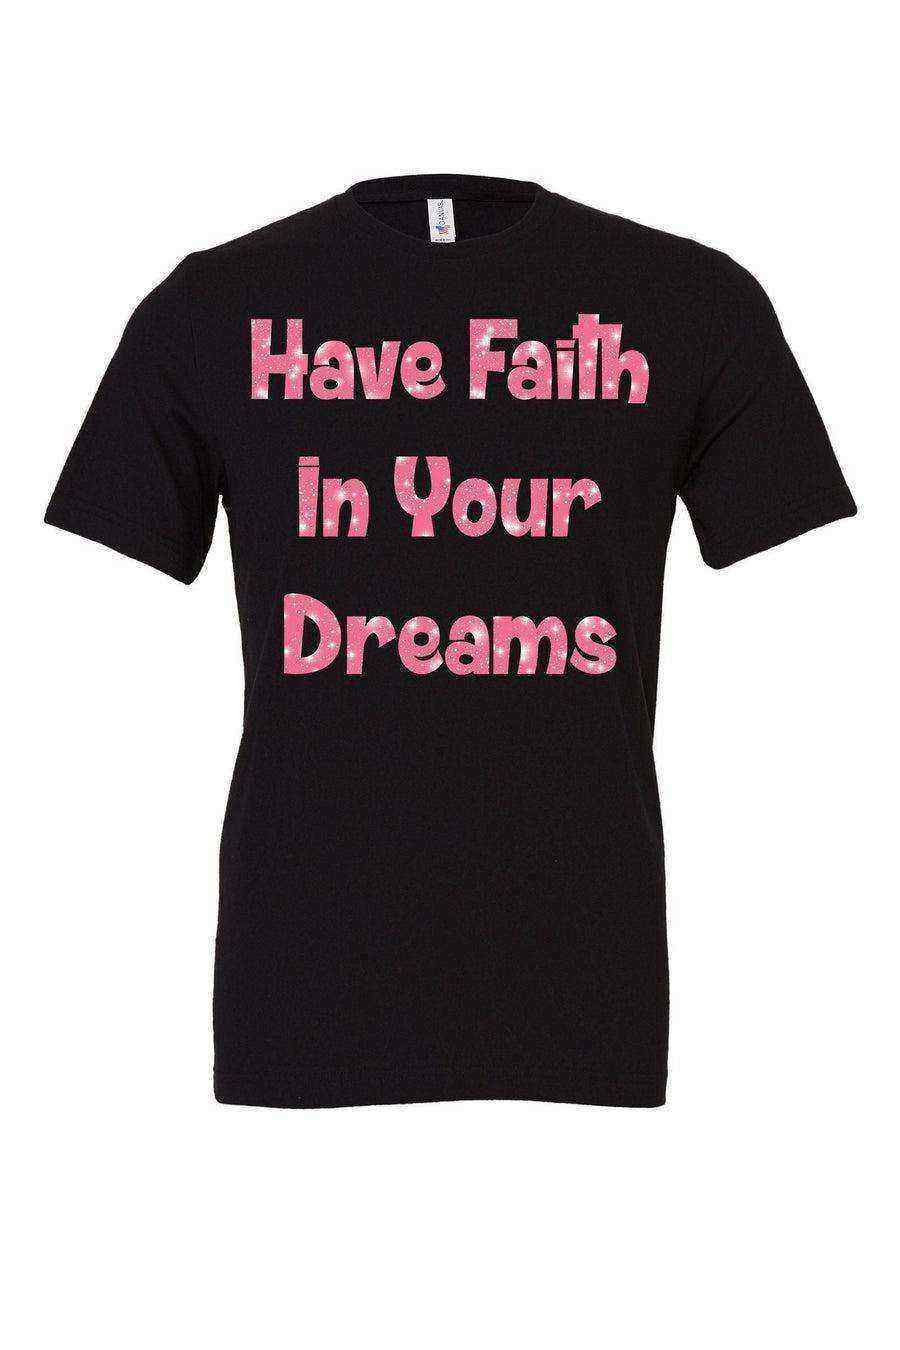 Have Faith In Your Dreams Tee - Dylan's Tees